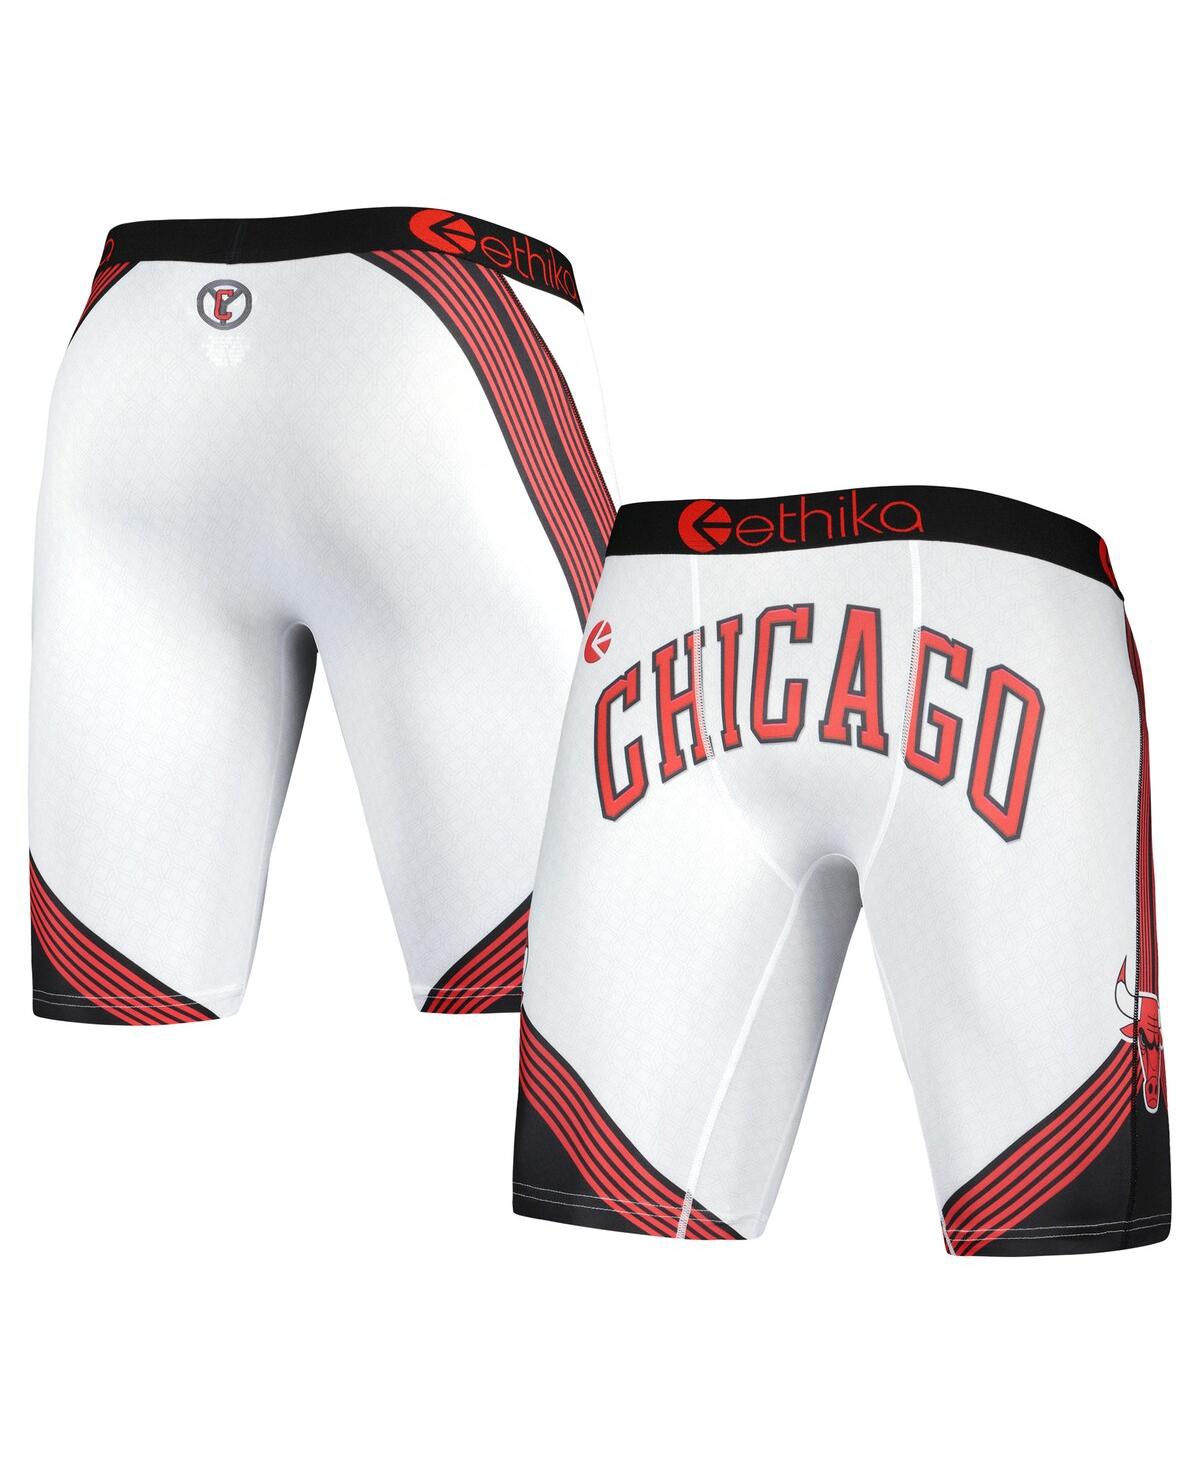 Men's Ethika Red Chicago Bulls City Edition Boxer Briefs - Red